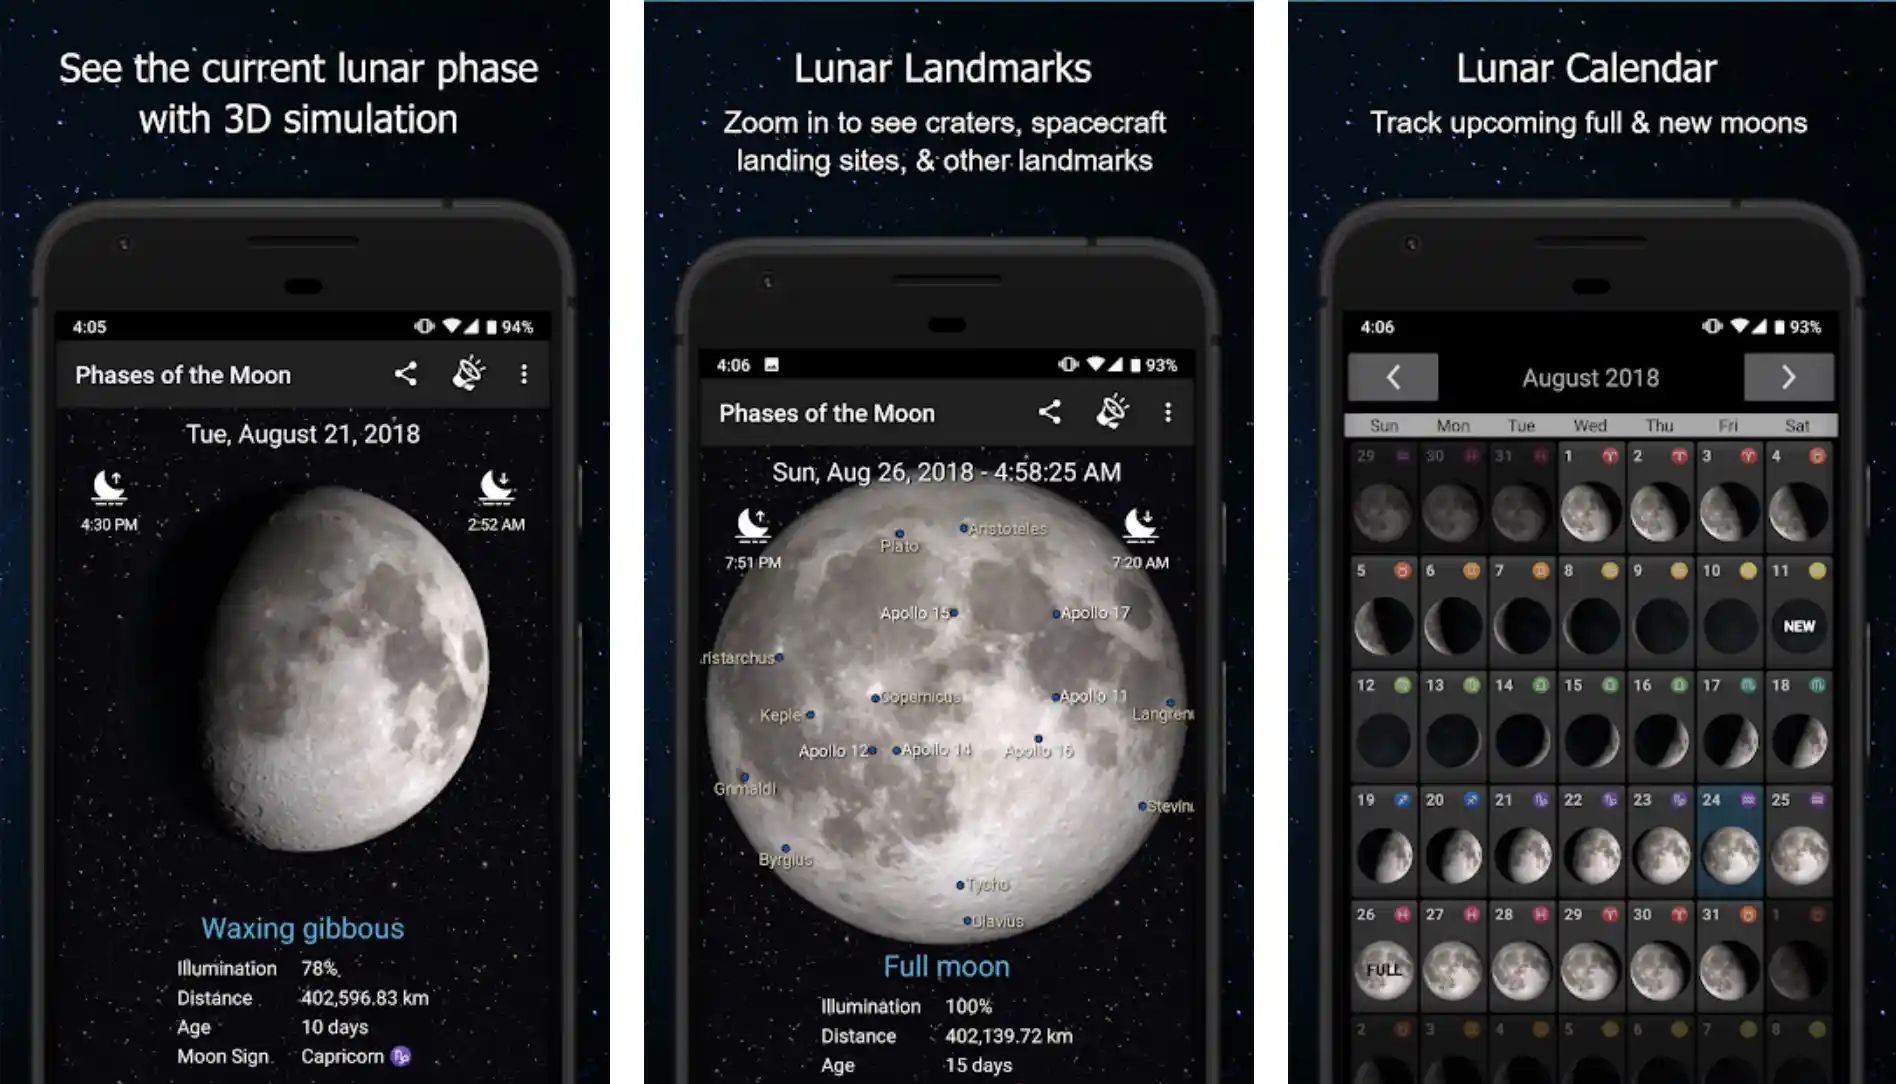 11 Best Moon Phase Apps For Calendar, Cycles and Astrology